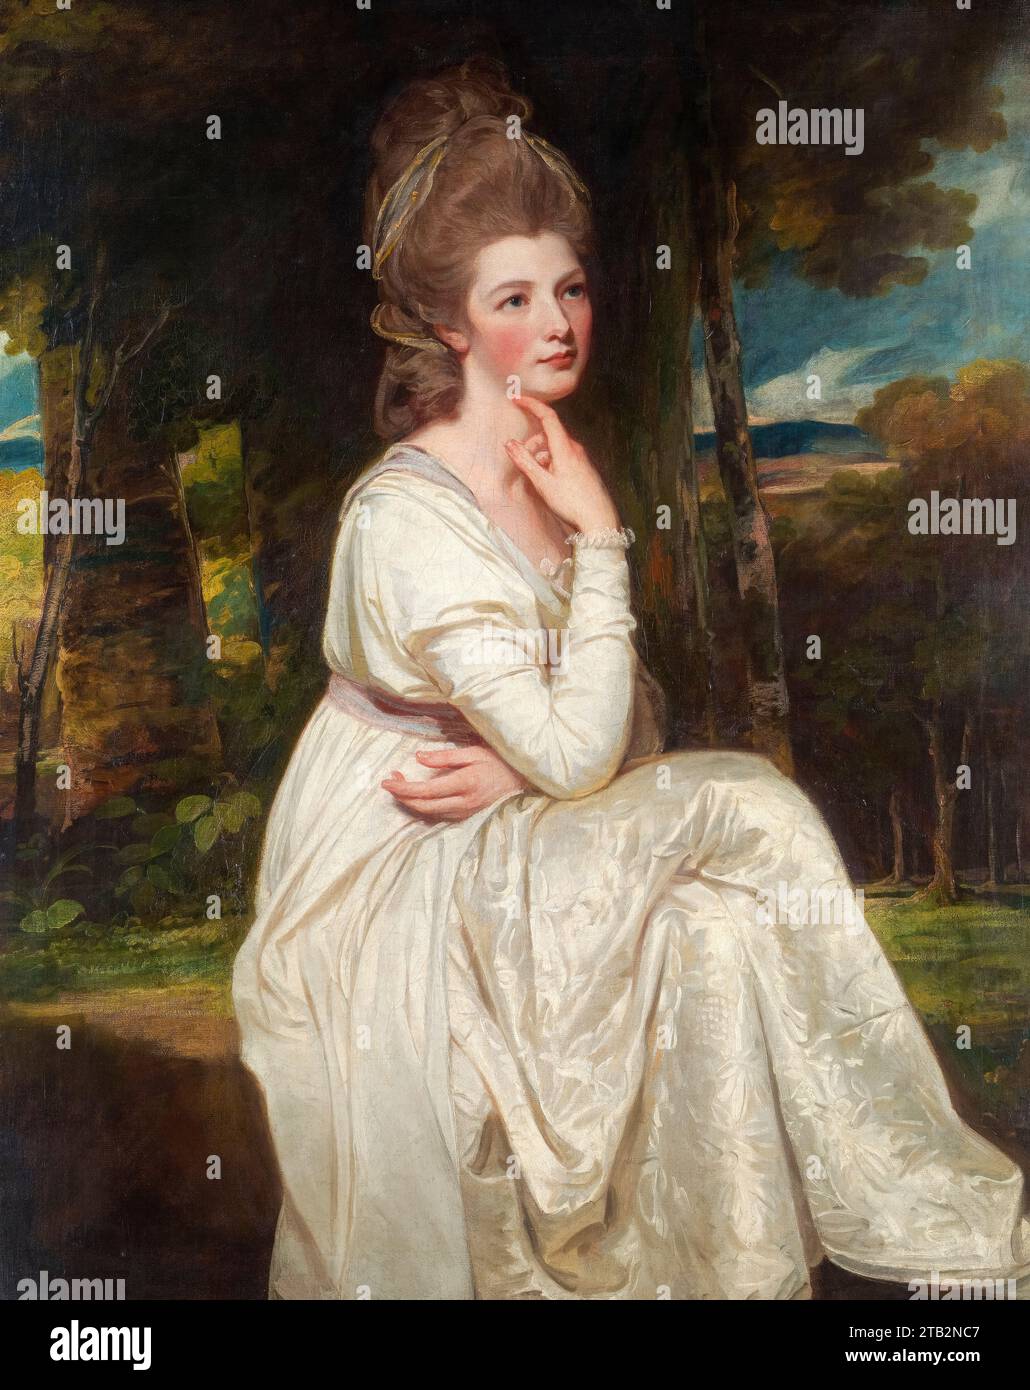 Lady Elizabeth Stanley (1753-1797), Countess of Derby, portrait painting in oil on canvas by George Romney, 1776-1778 Stock Photo